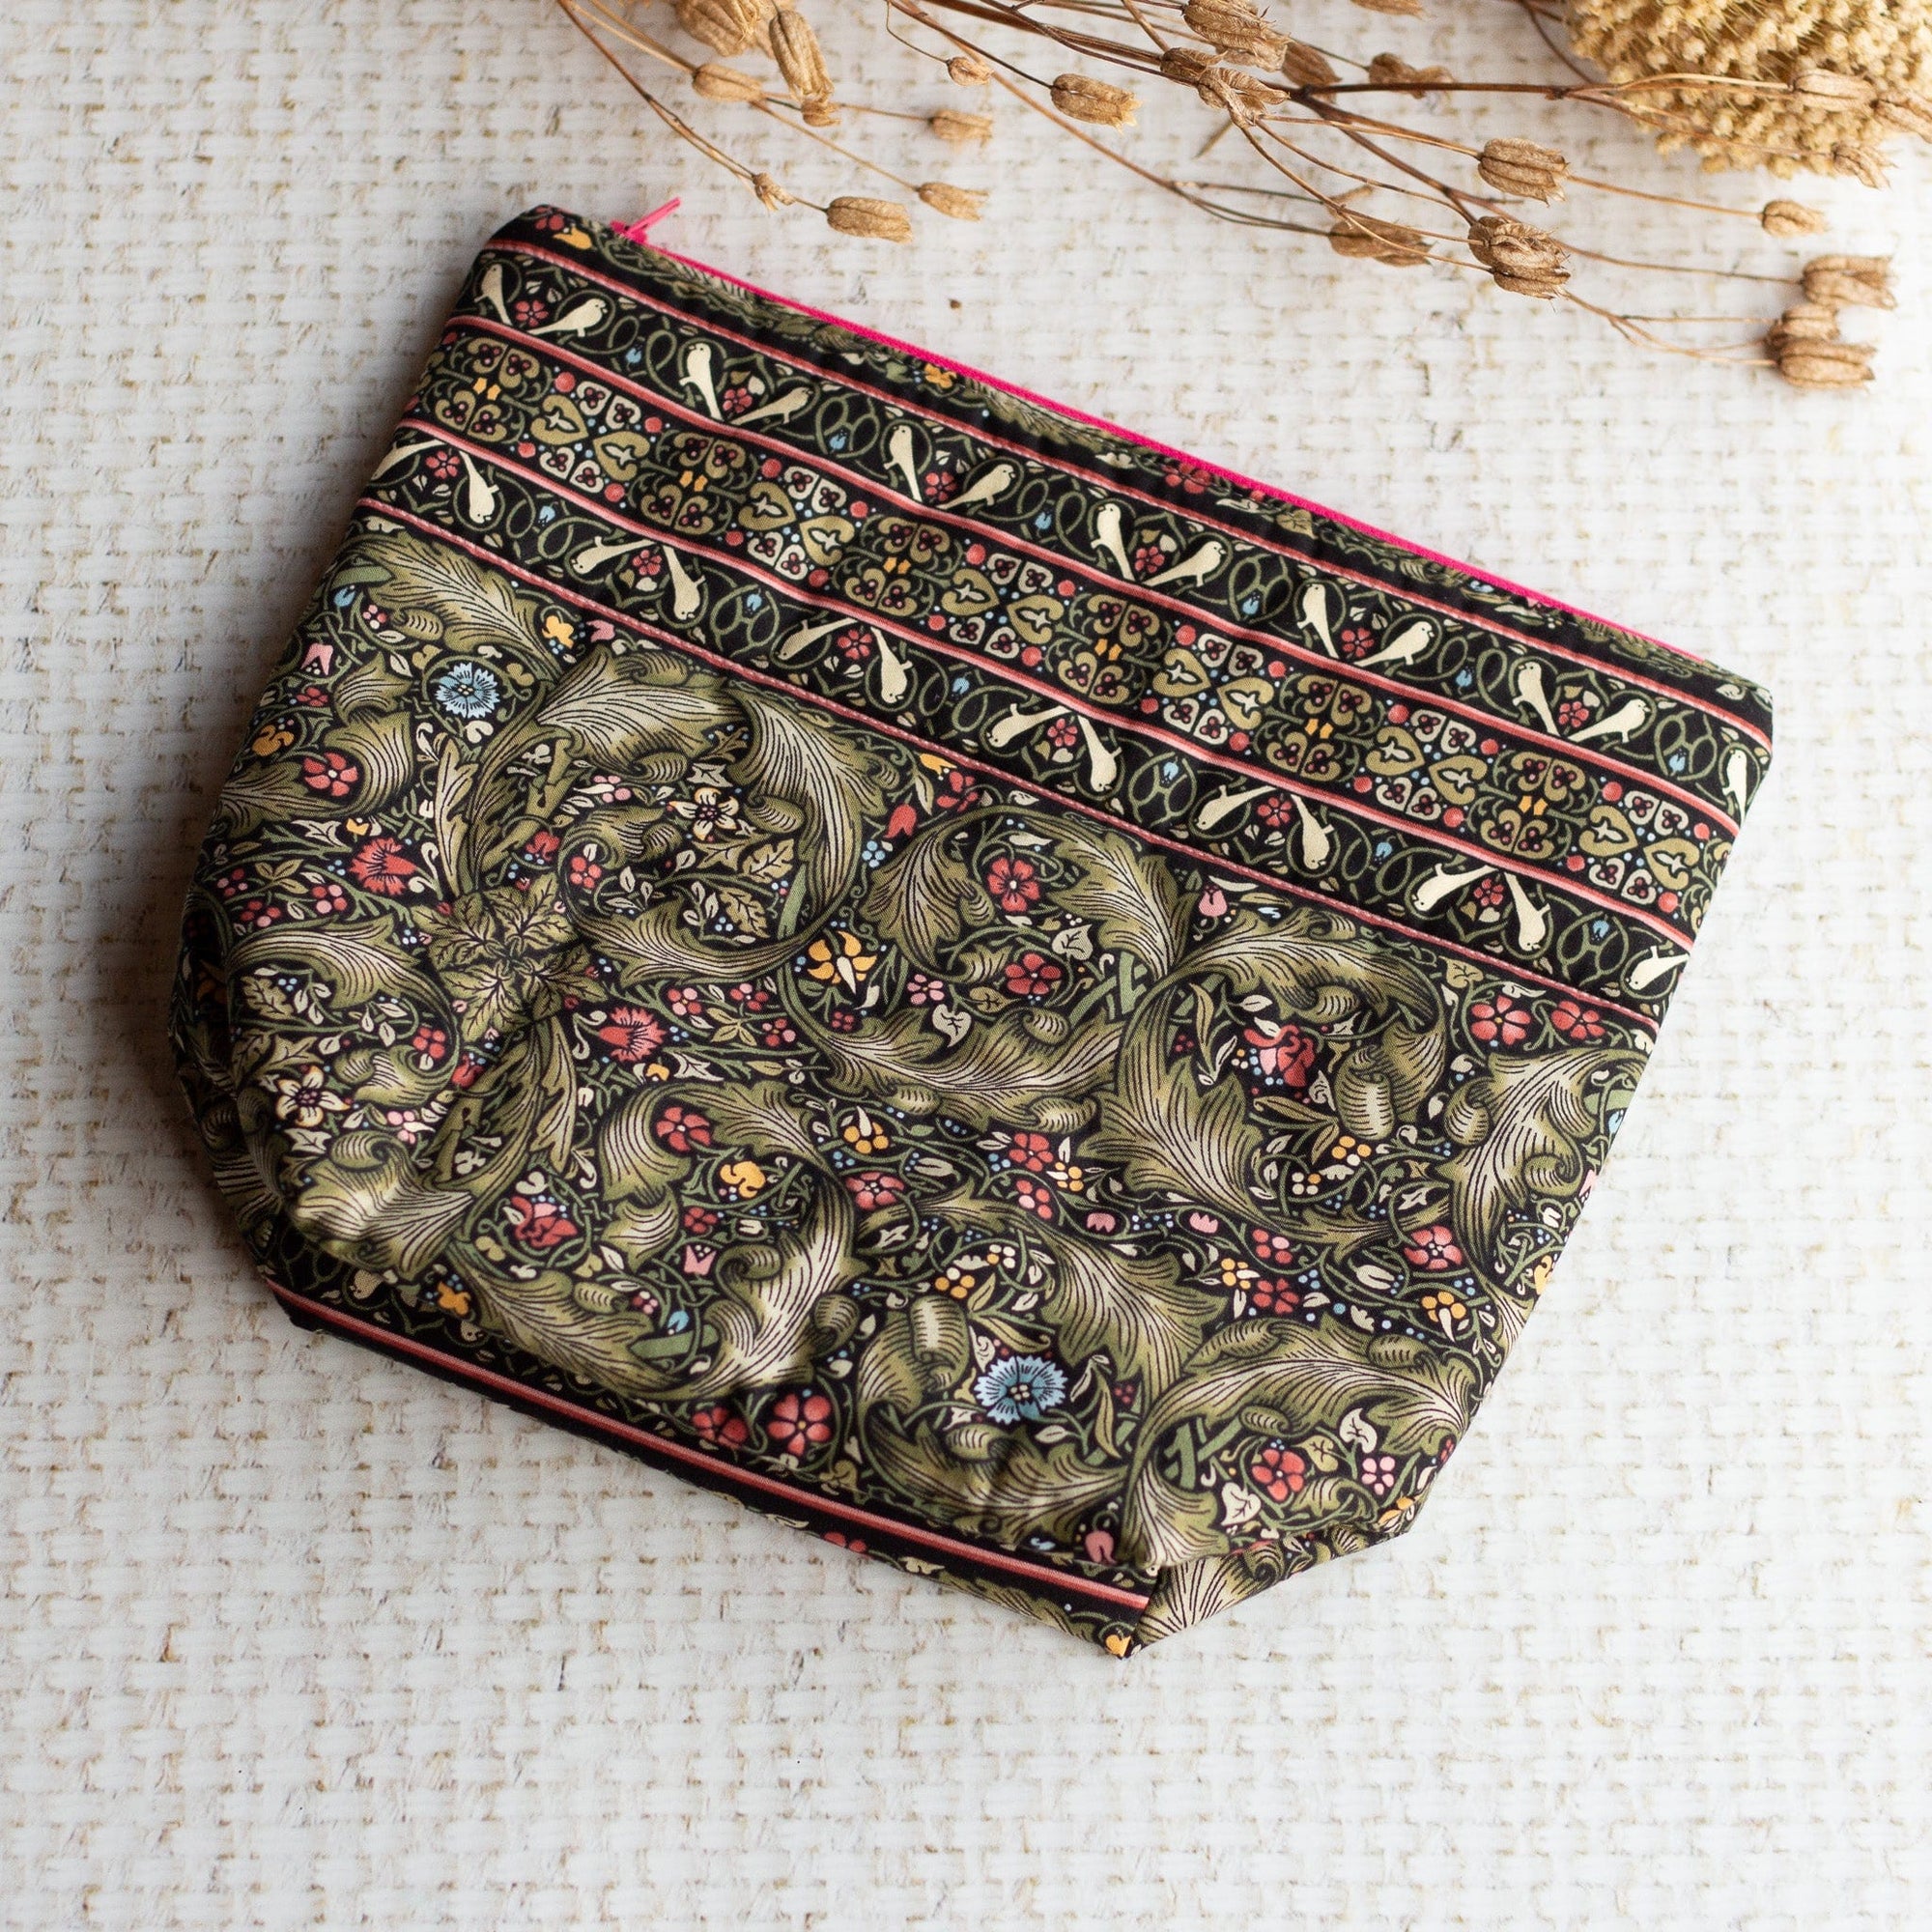 Madge Collection Bag 6 The Madge Collection - Large 'William Morris' Zipper Project Bags